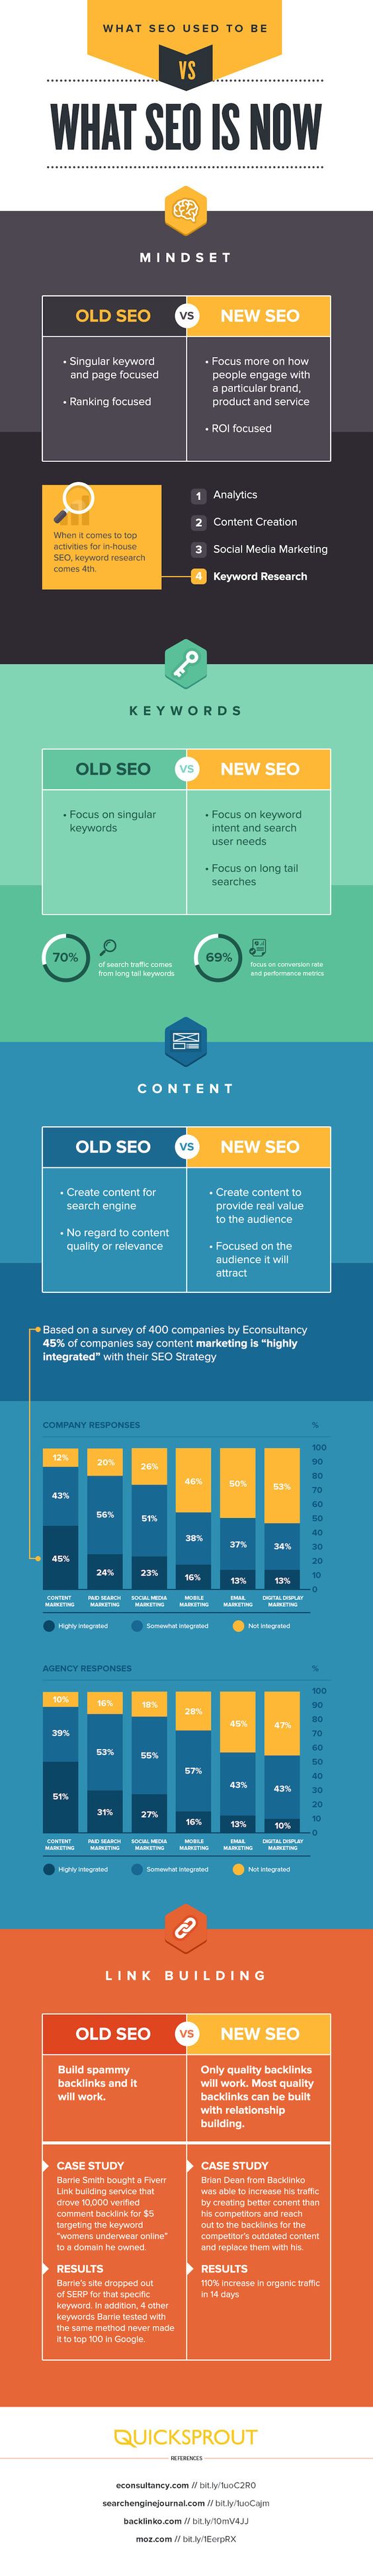 SEO Versus New SEO: What You Need to Know